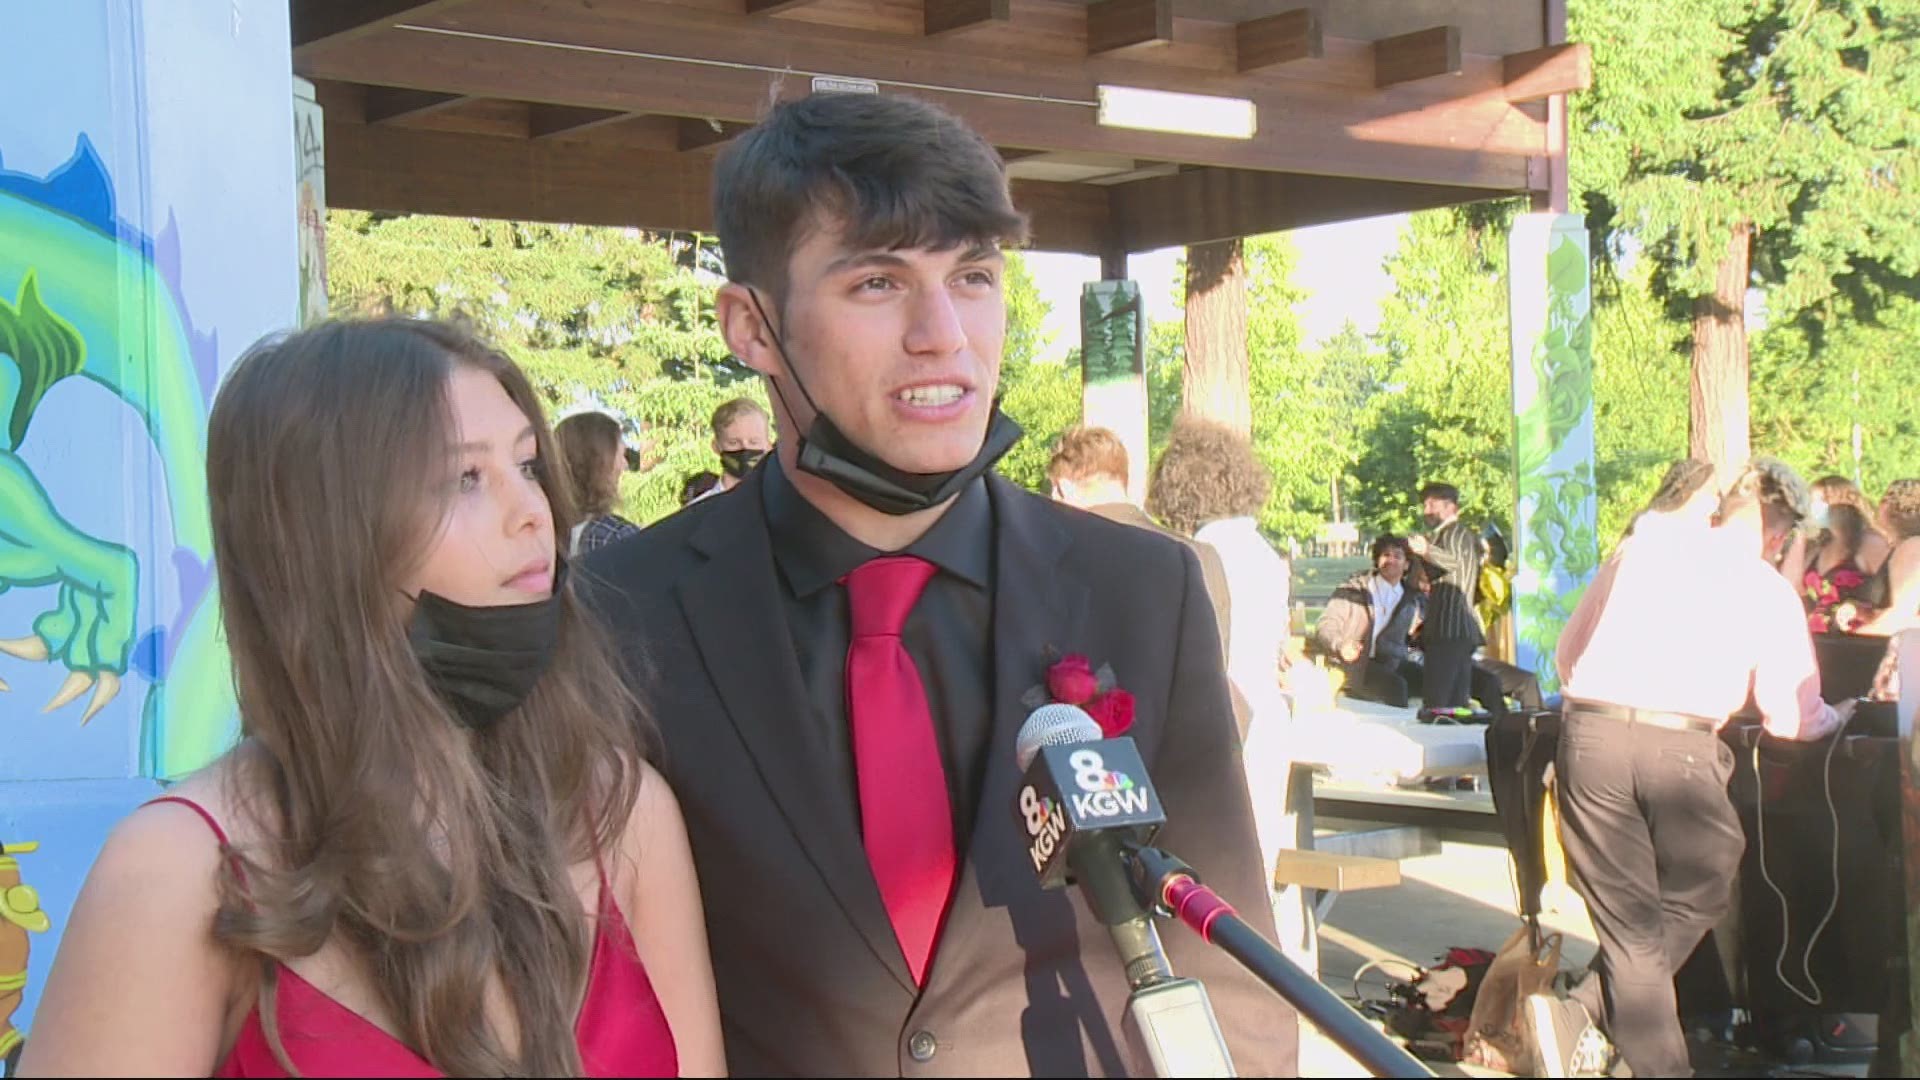 The students of Hudson's Bay High School turned out for a parent-hosted prom at the park after the official event was canceled due to COVID19